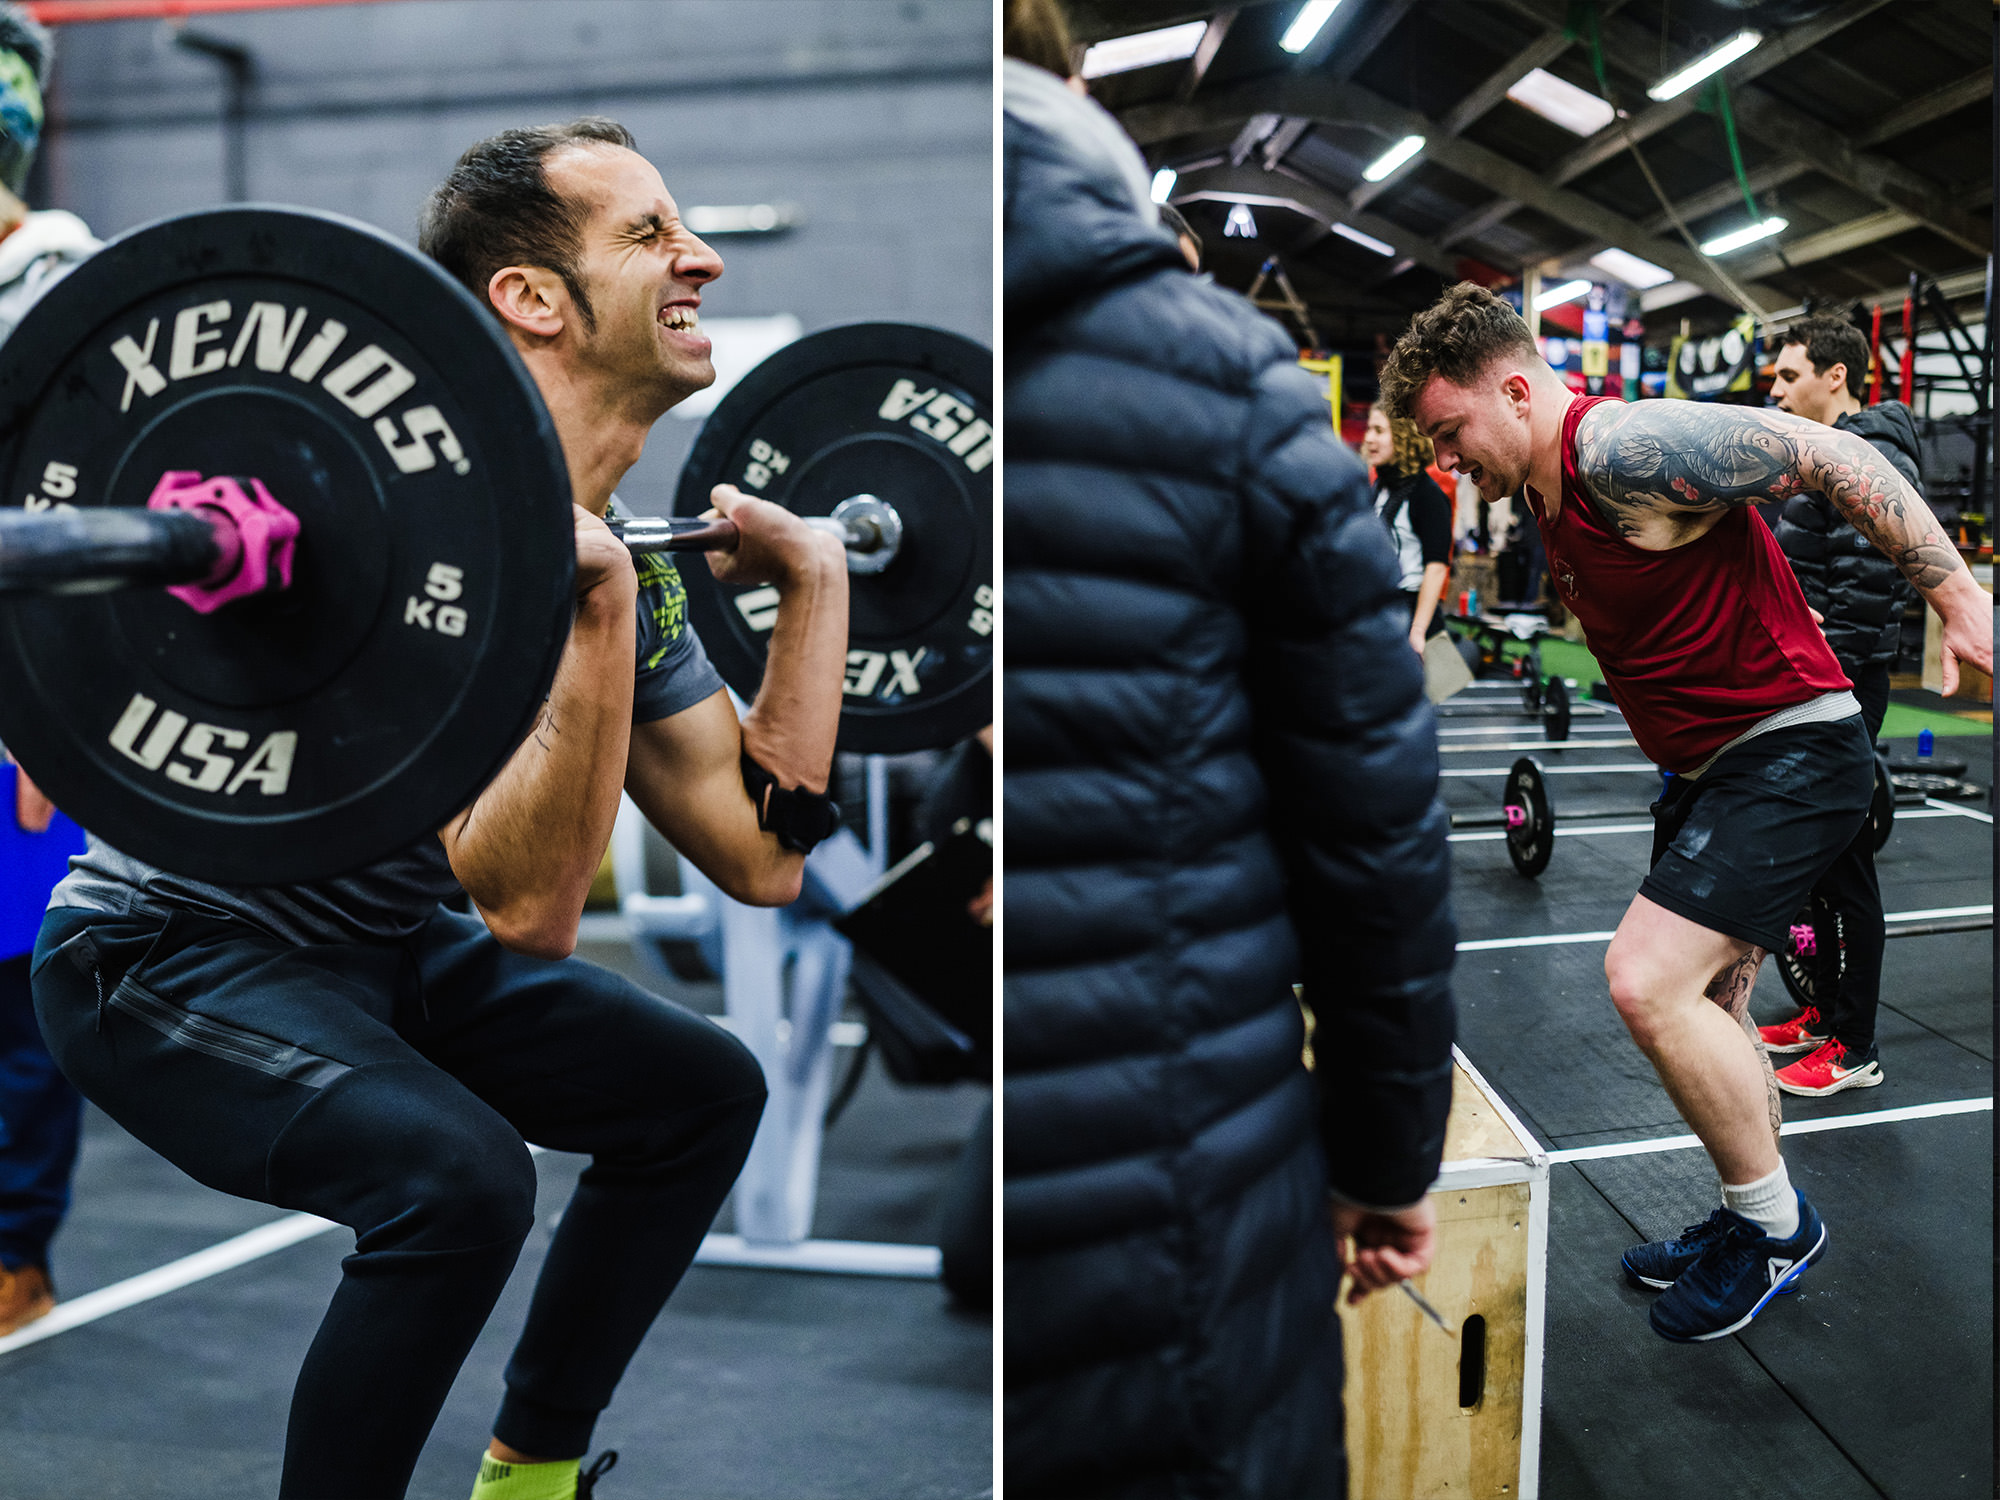 Crossfit event photography